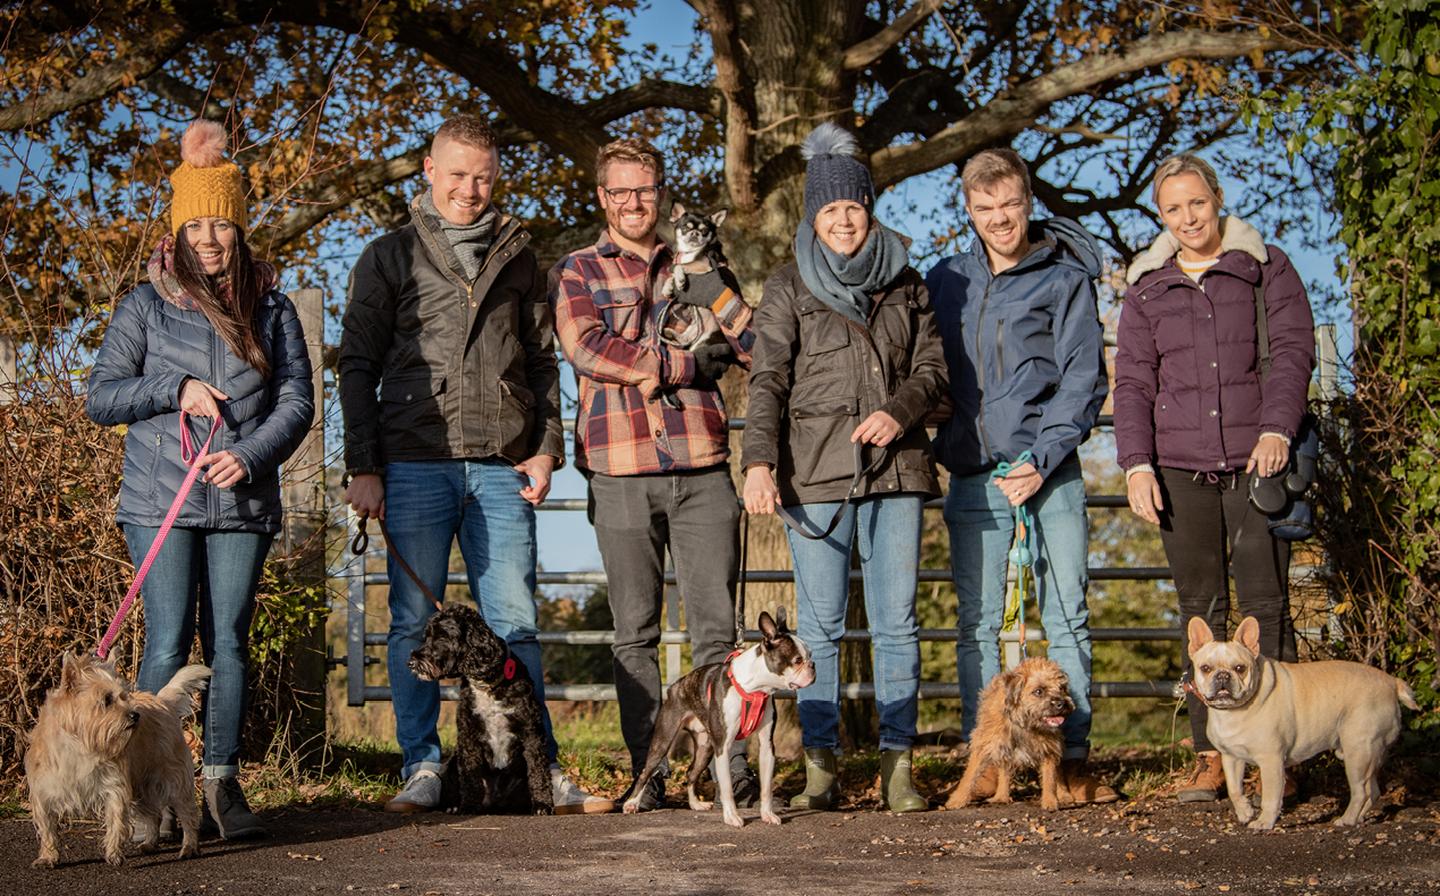 The FatFace crew lined up with their dogs for a group photo, while wearing cosy coats and jackets